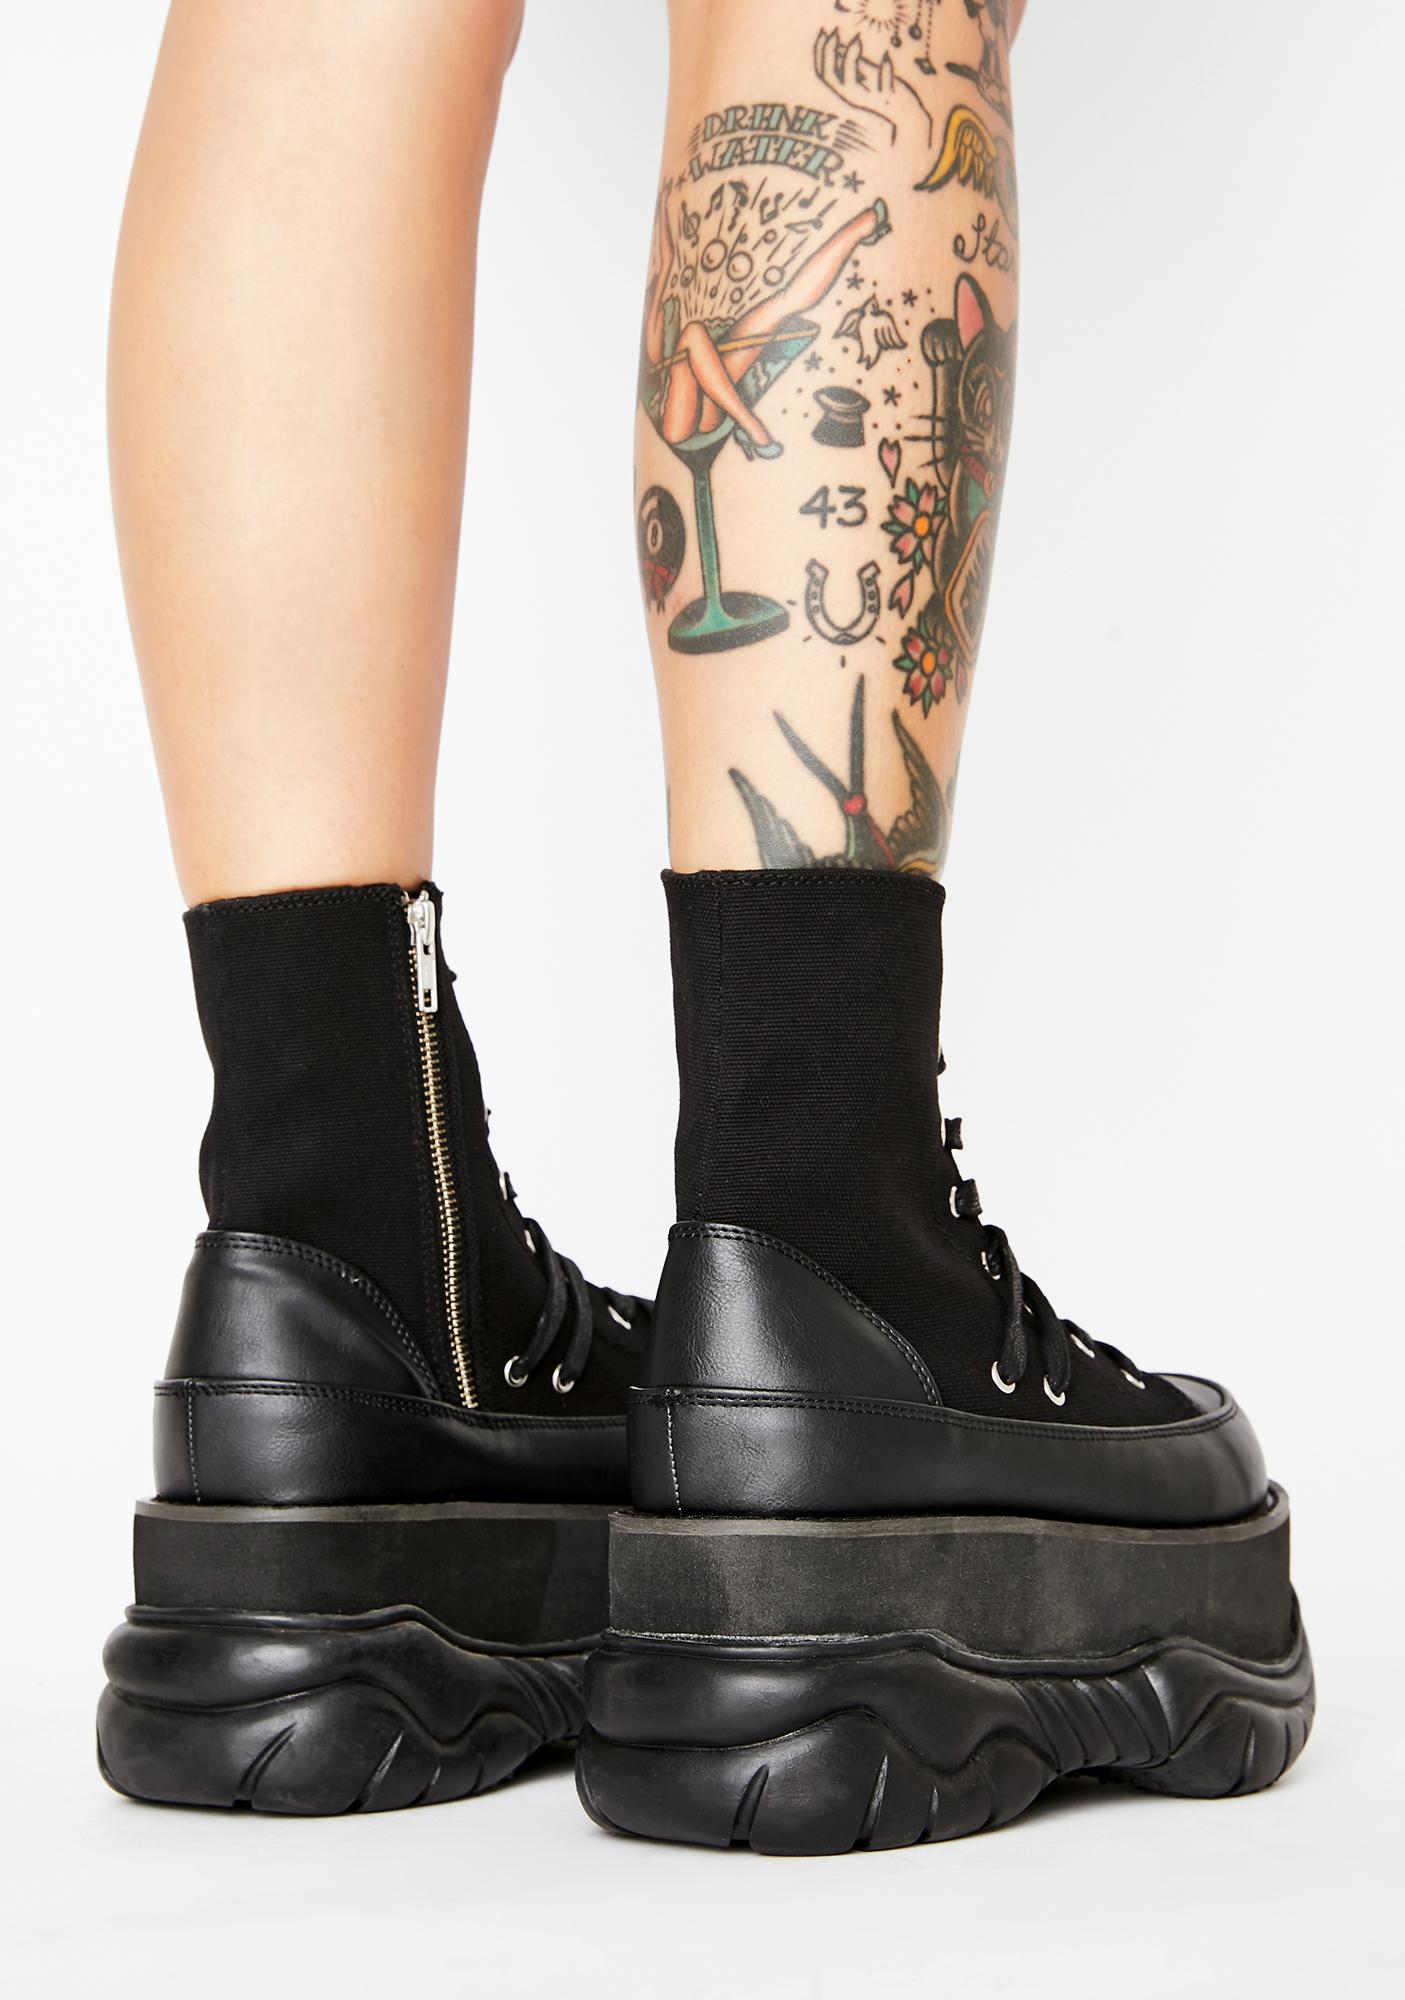 Demonia Neptune-115 Lace-Up Ankle High Platform Boots | Dolls Kill